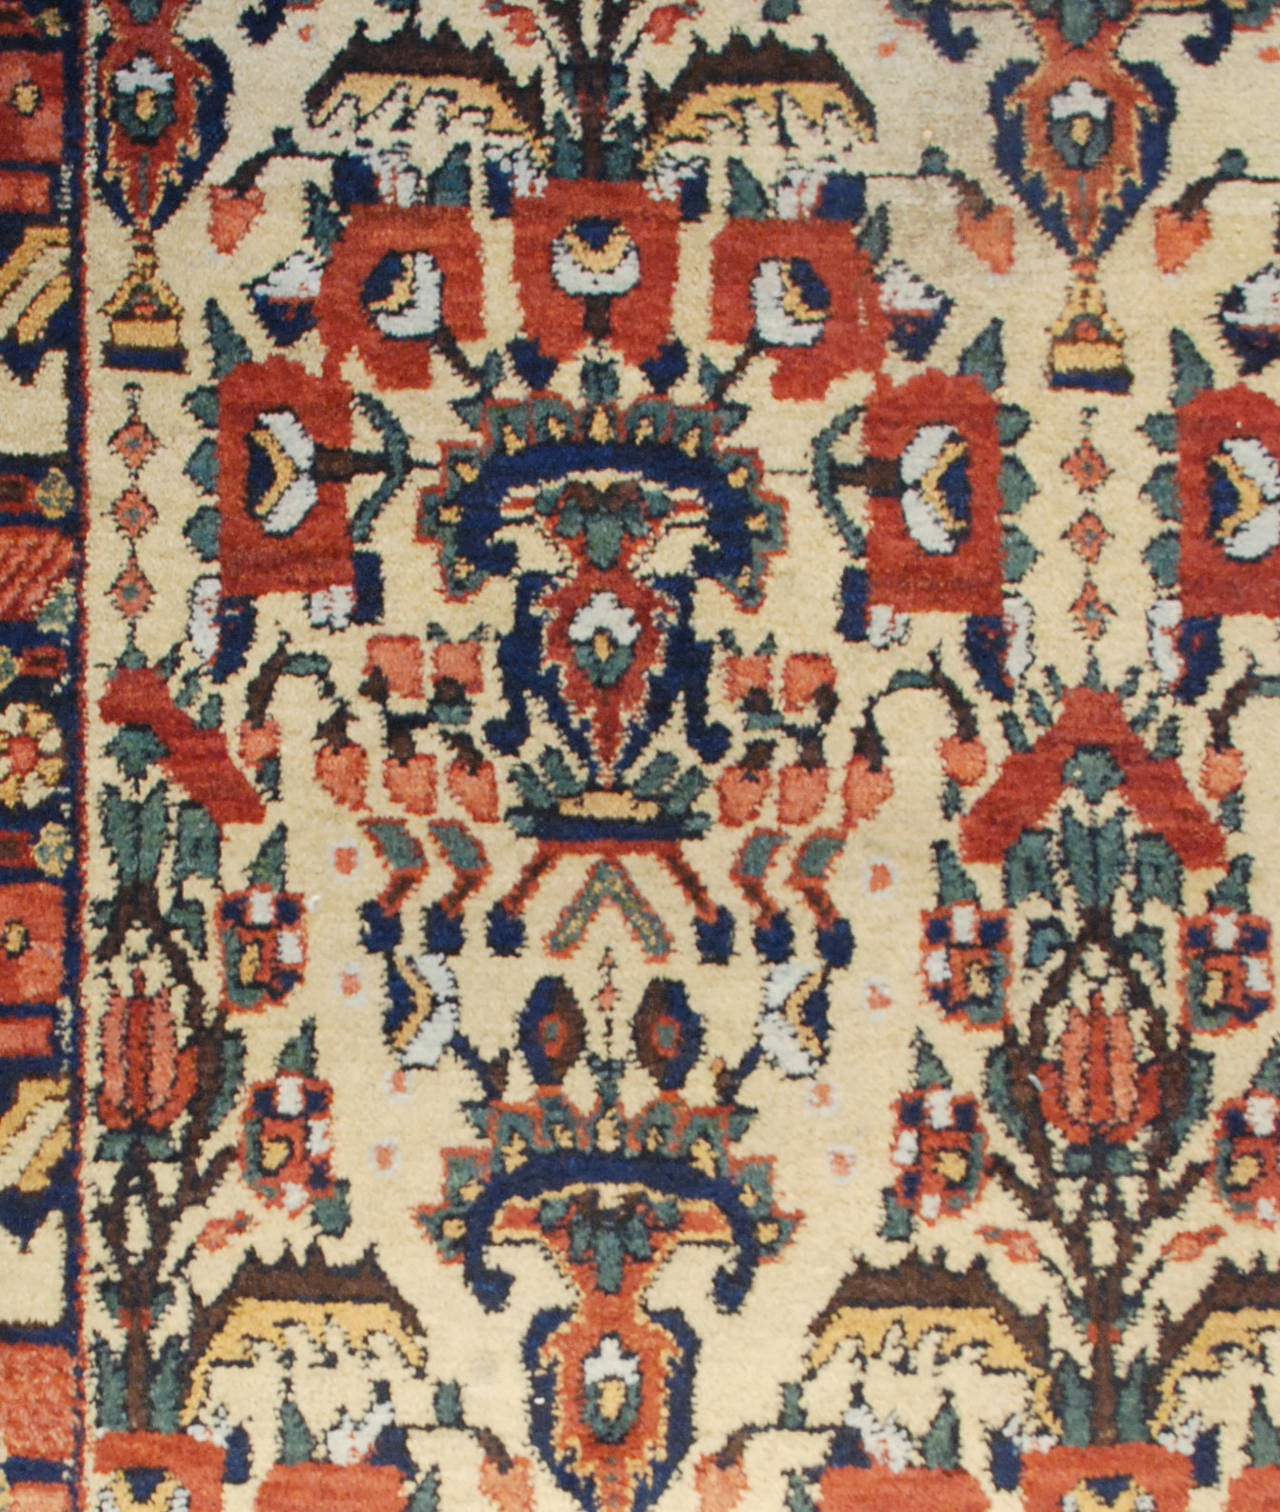 An early 20th century Persian Afshar rug with an all-over pattern of flowers in vases on a natural undyed wool background, surrounded by a complementary floral border.